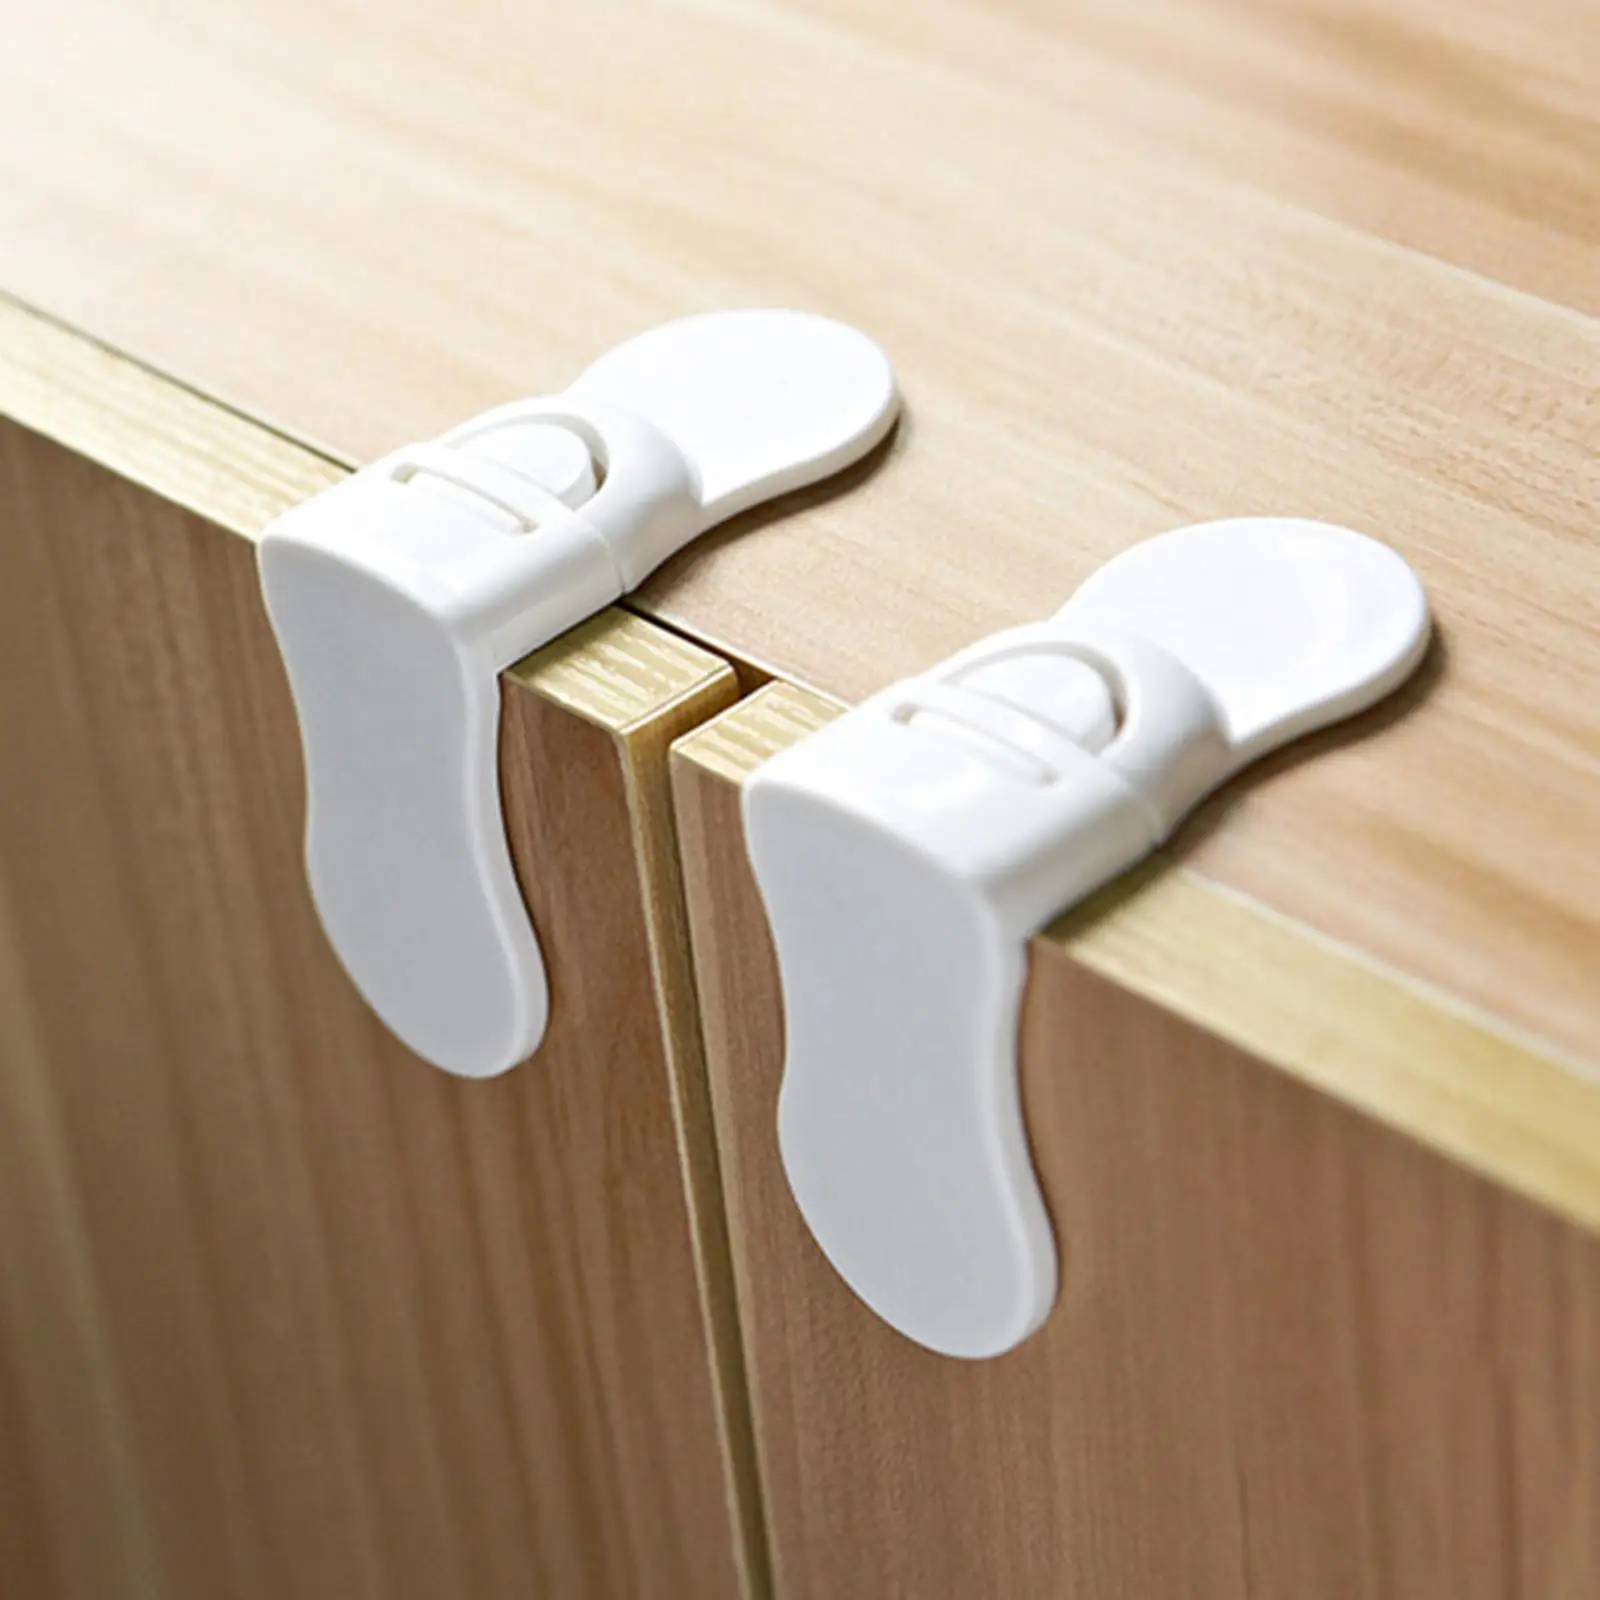 2Pcs Baby Proofing Cabinet Locks, Lock System Cabinet Locks for Drawers Cabinets